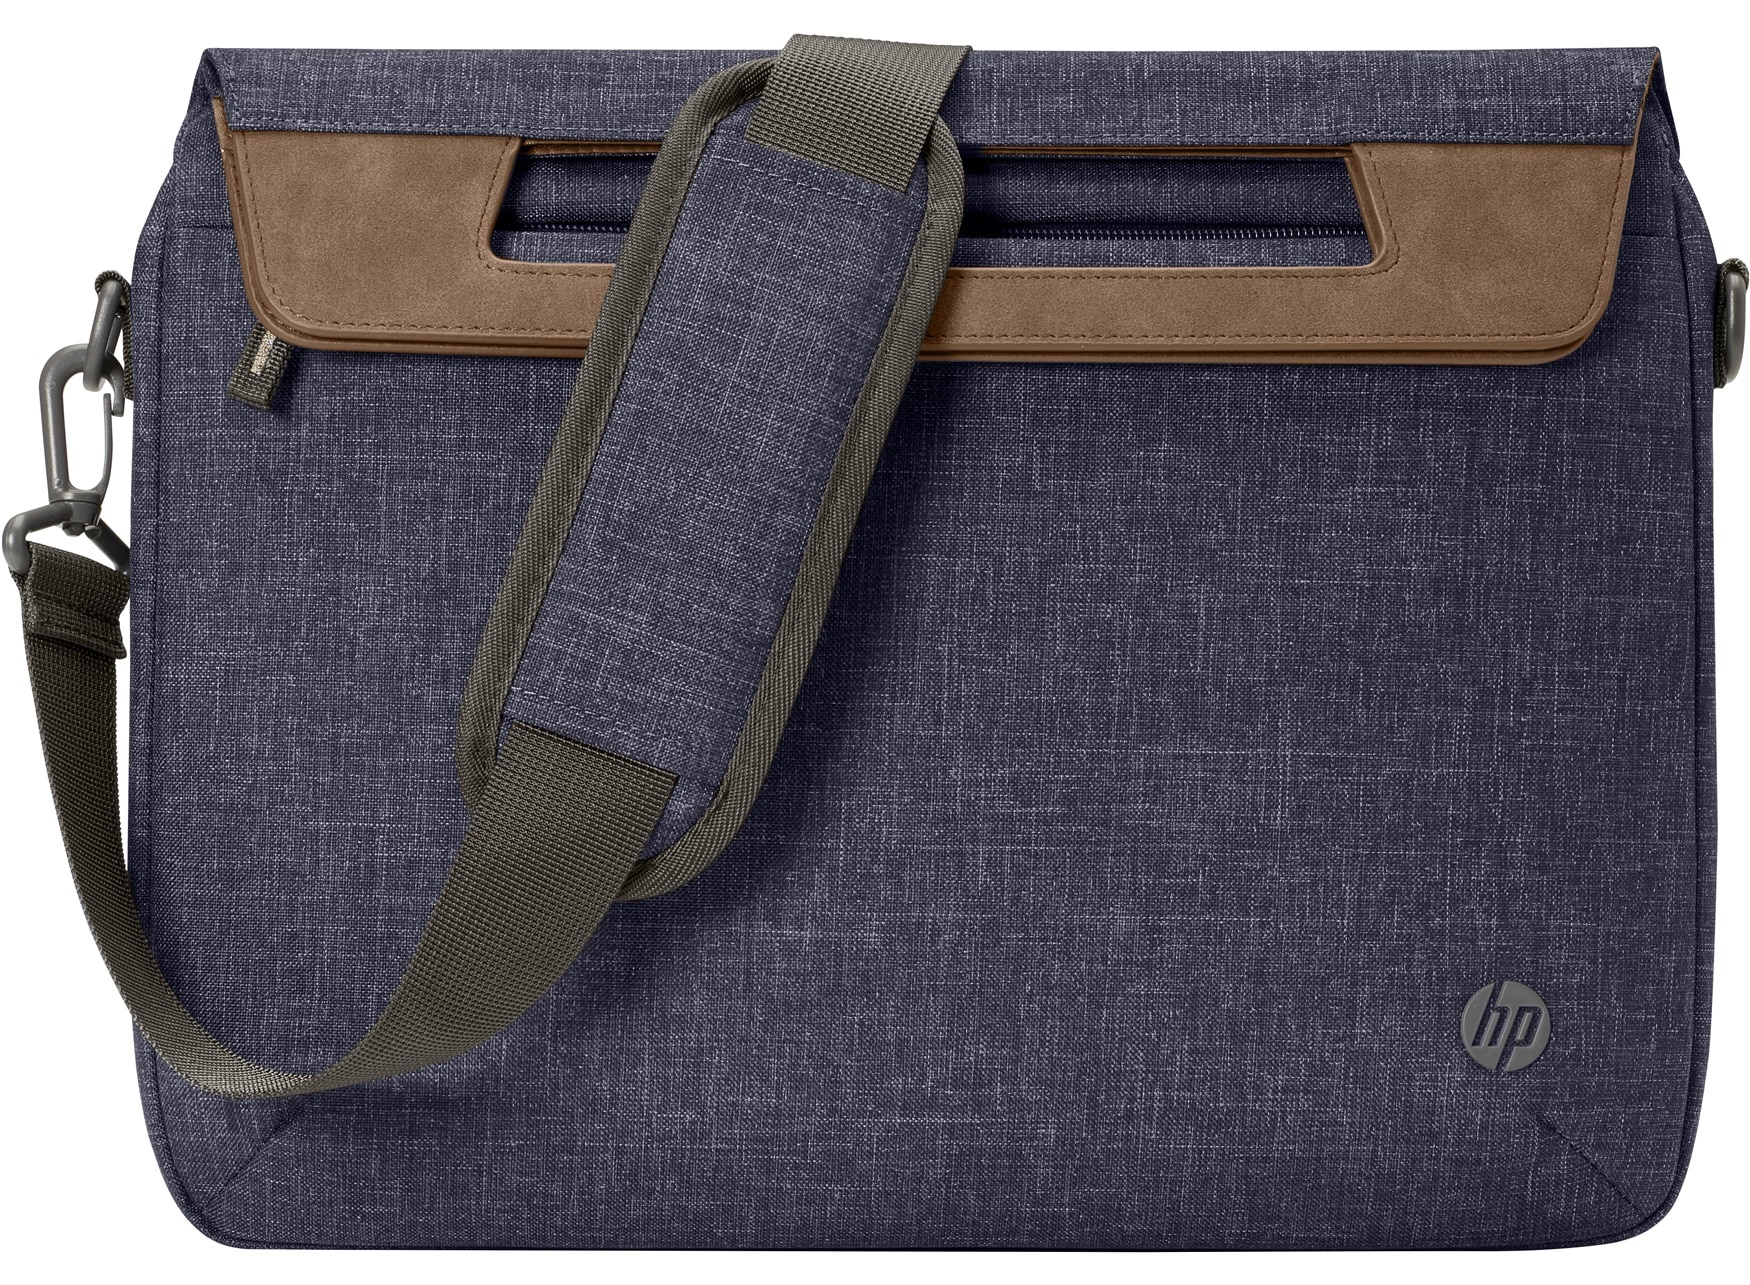 HP RENEW 14 NAVY BRIEF CASE CAN/ENG UPC  - HP